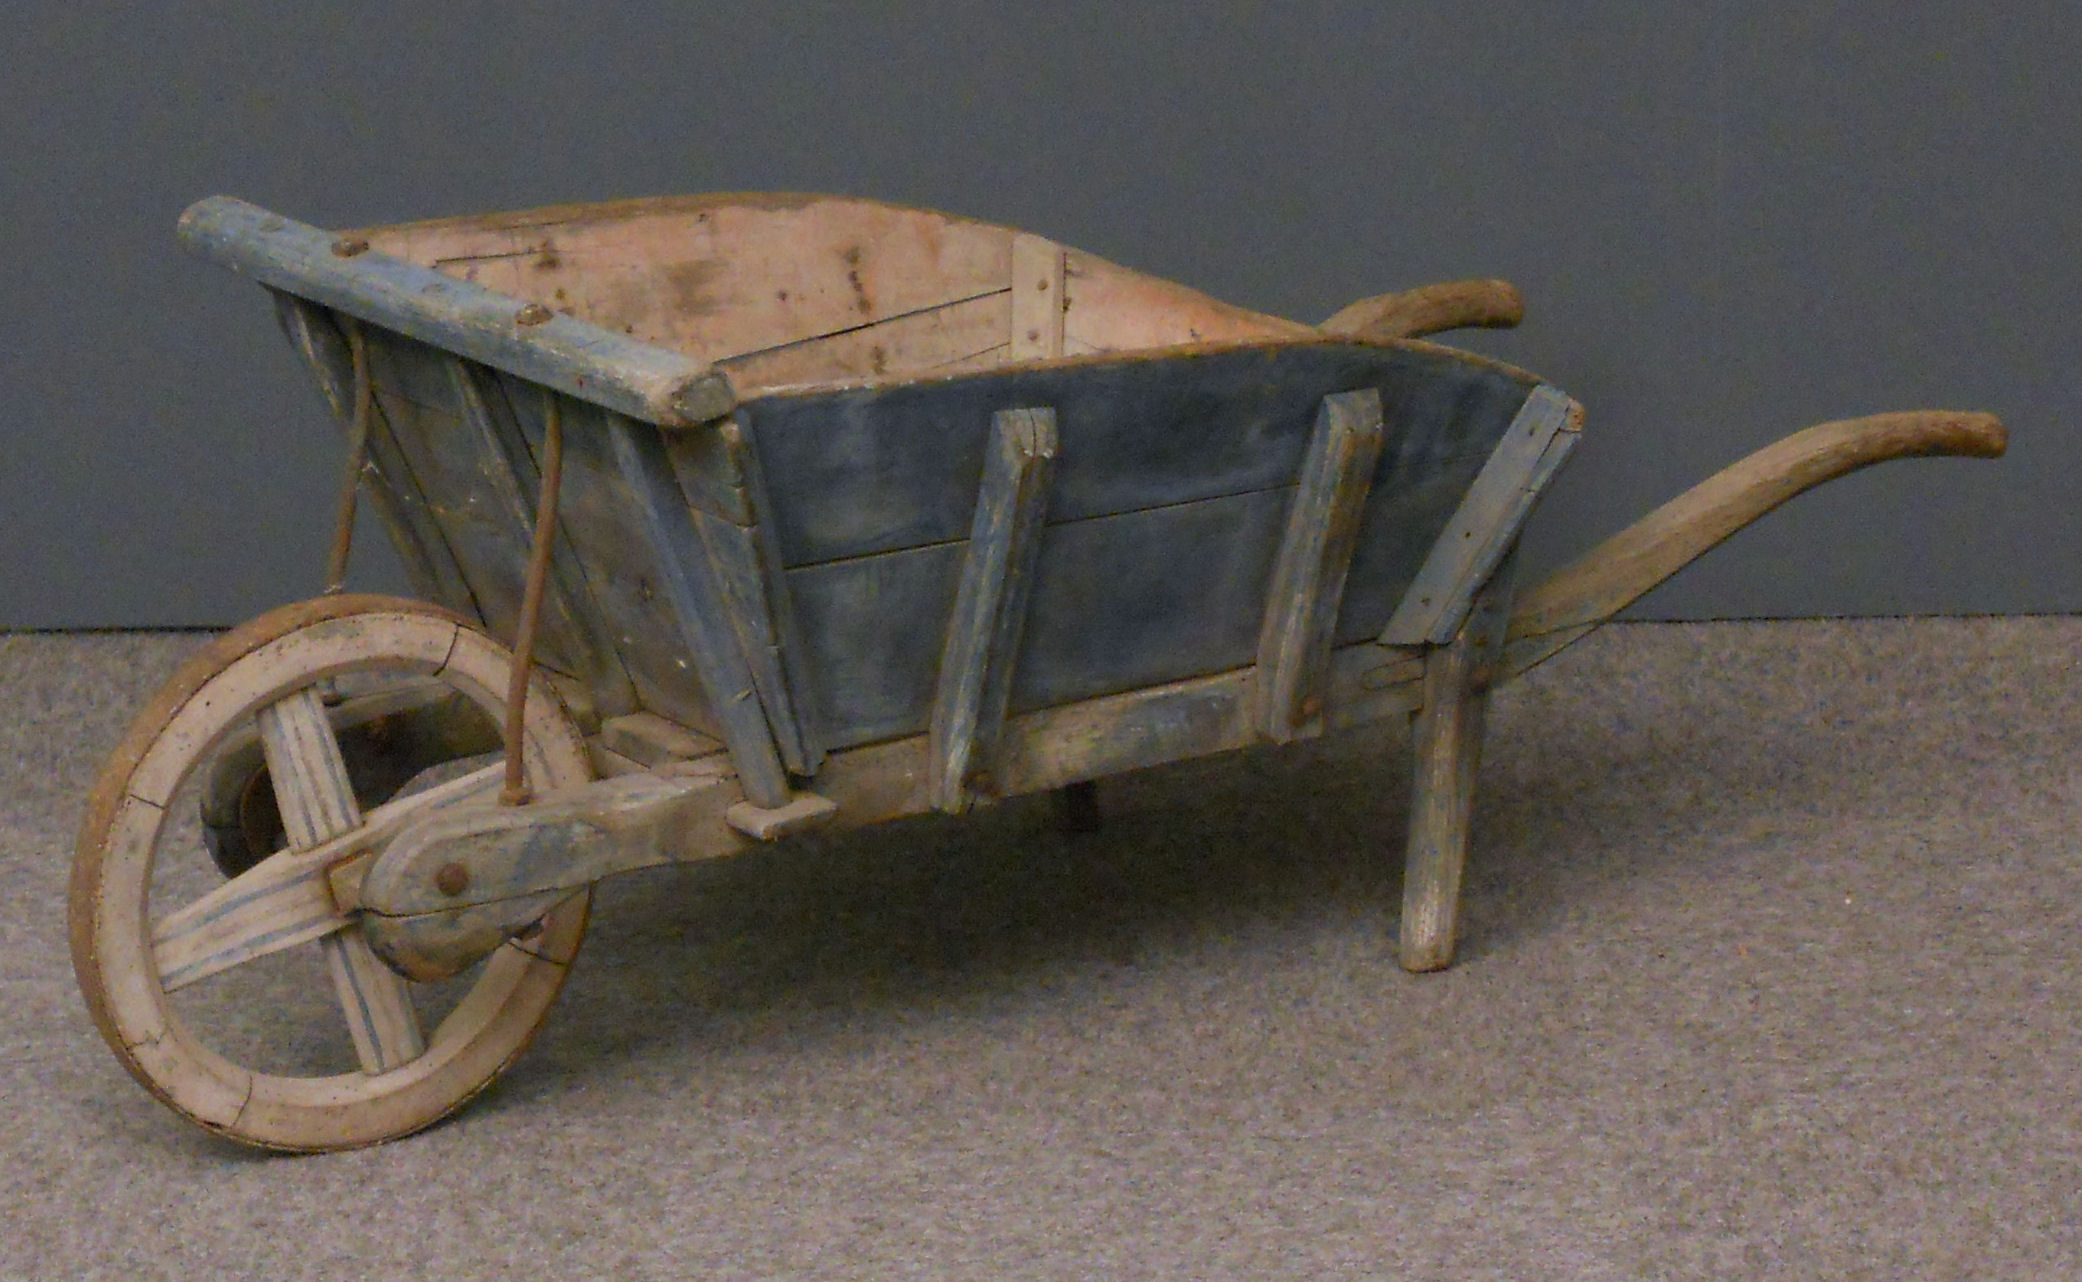 The Wheelbarrow is another Greek invention